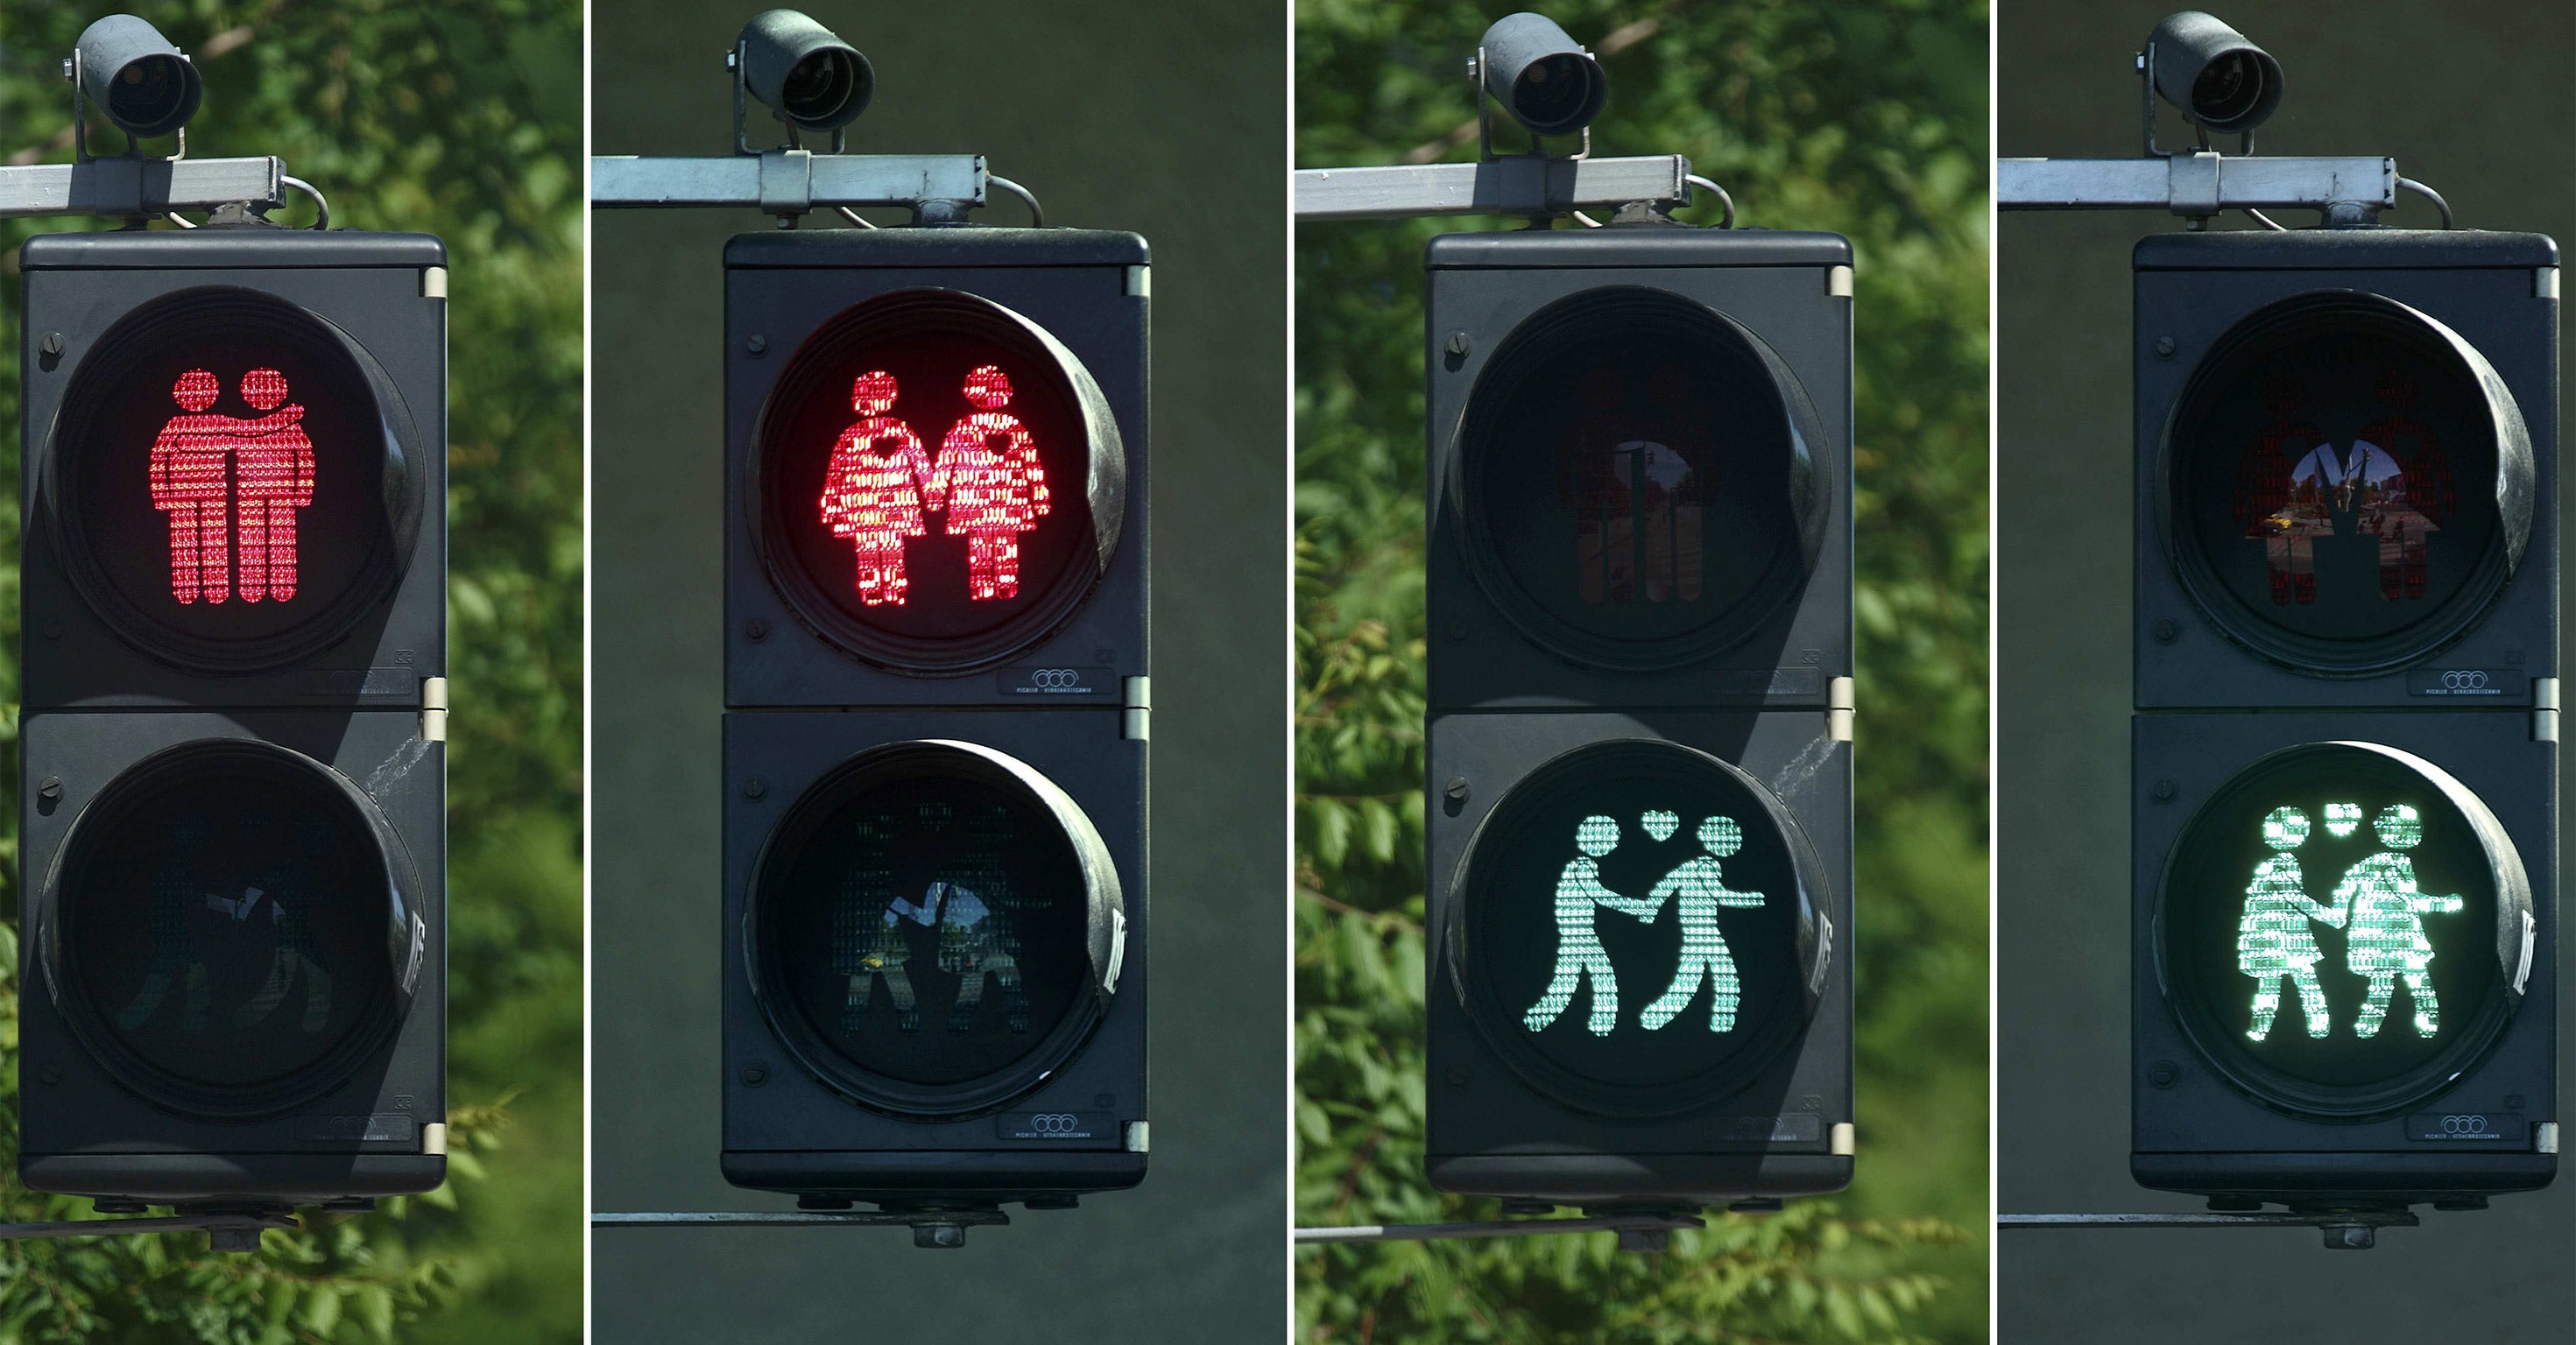 The traffic lights have proved popular, but not with everyone